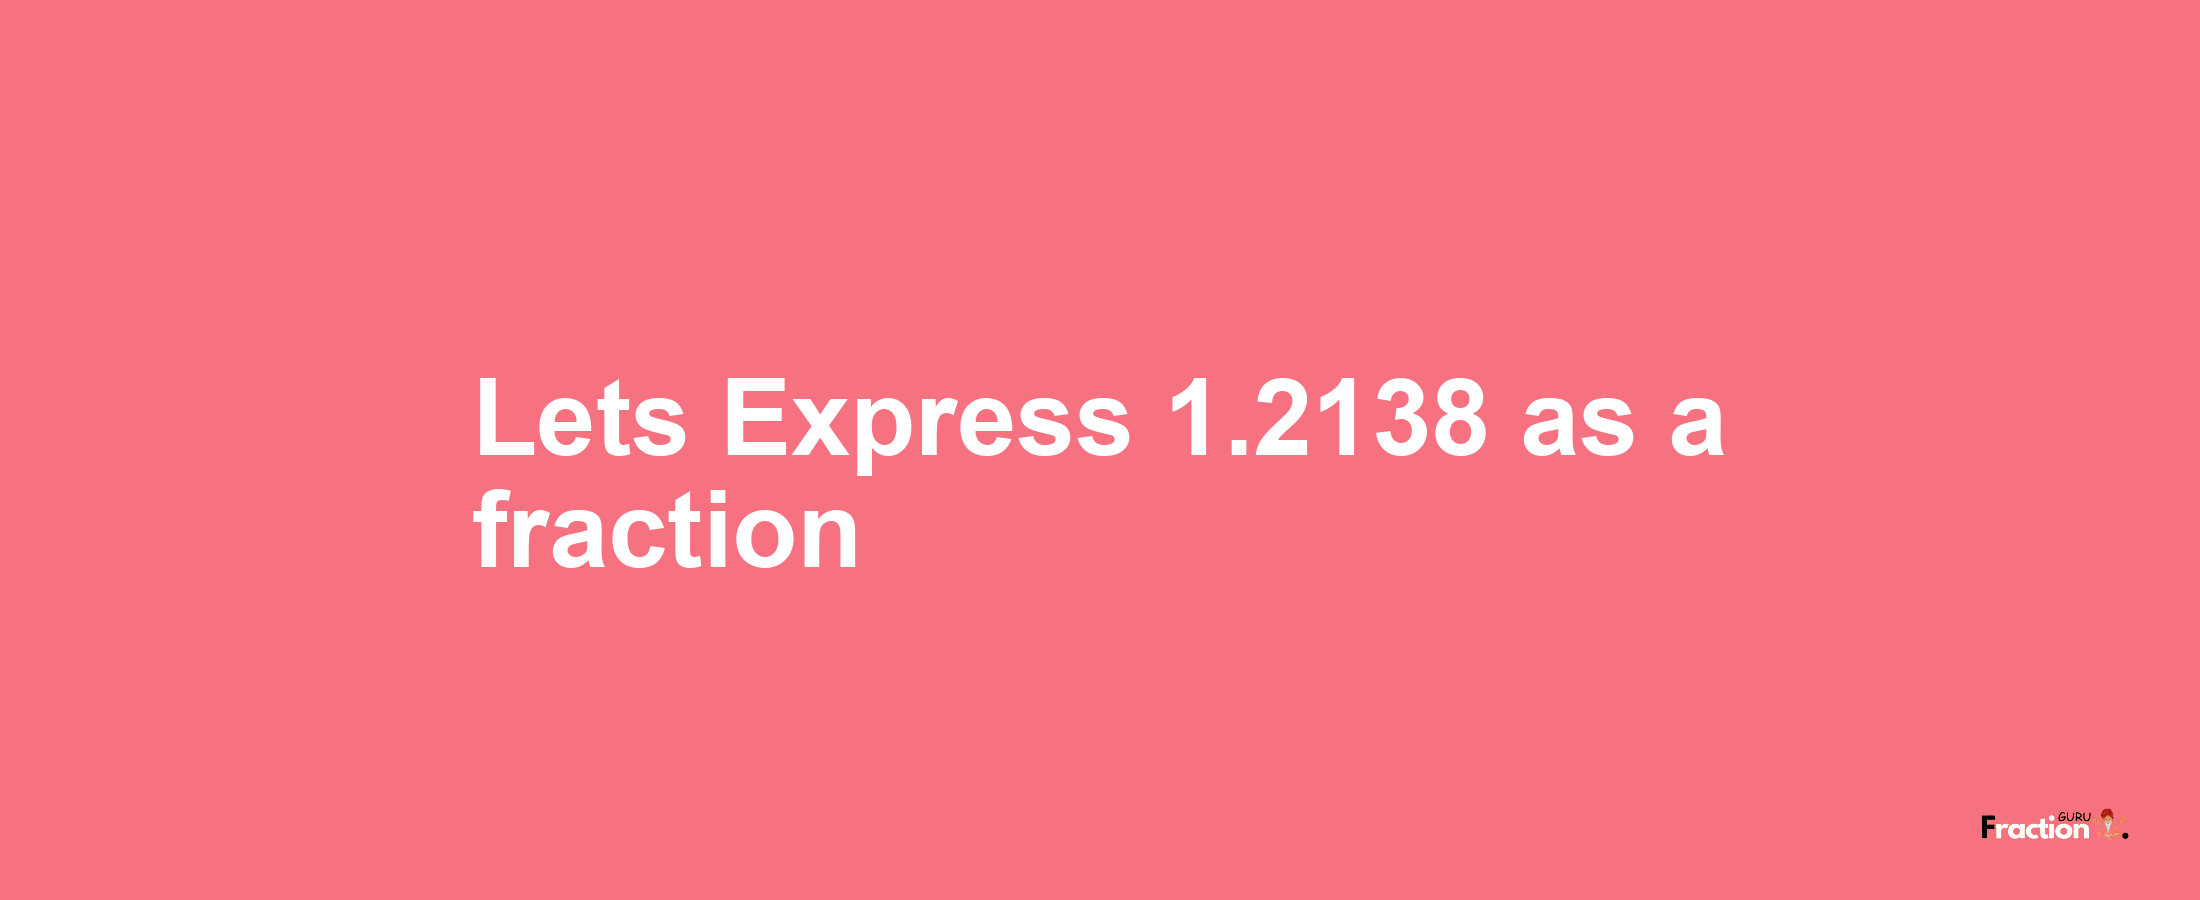 Lets Express 1.2138 as afraction